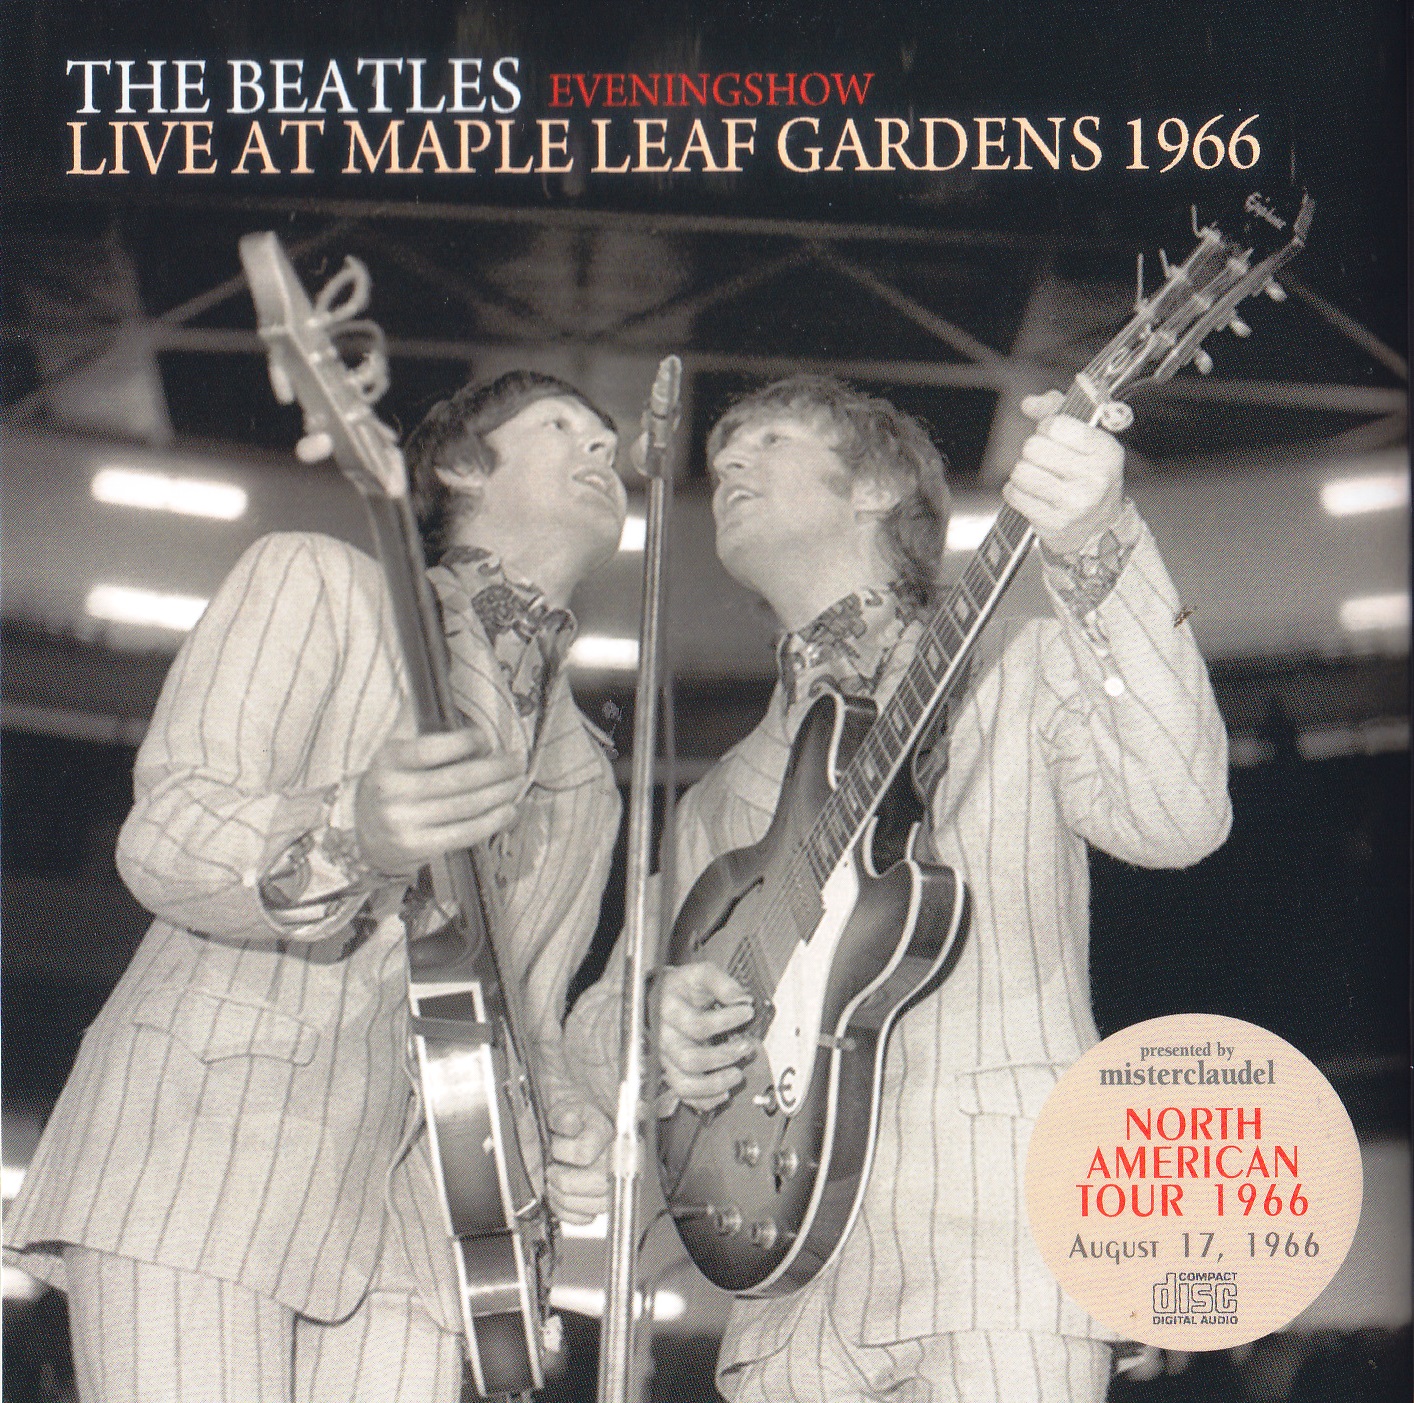 mccd-117-118 - The Beatles - Live At Maple Leaf Gardens 1966 Evening Show (2018) (2 CD Set) Front.jpg